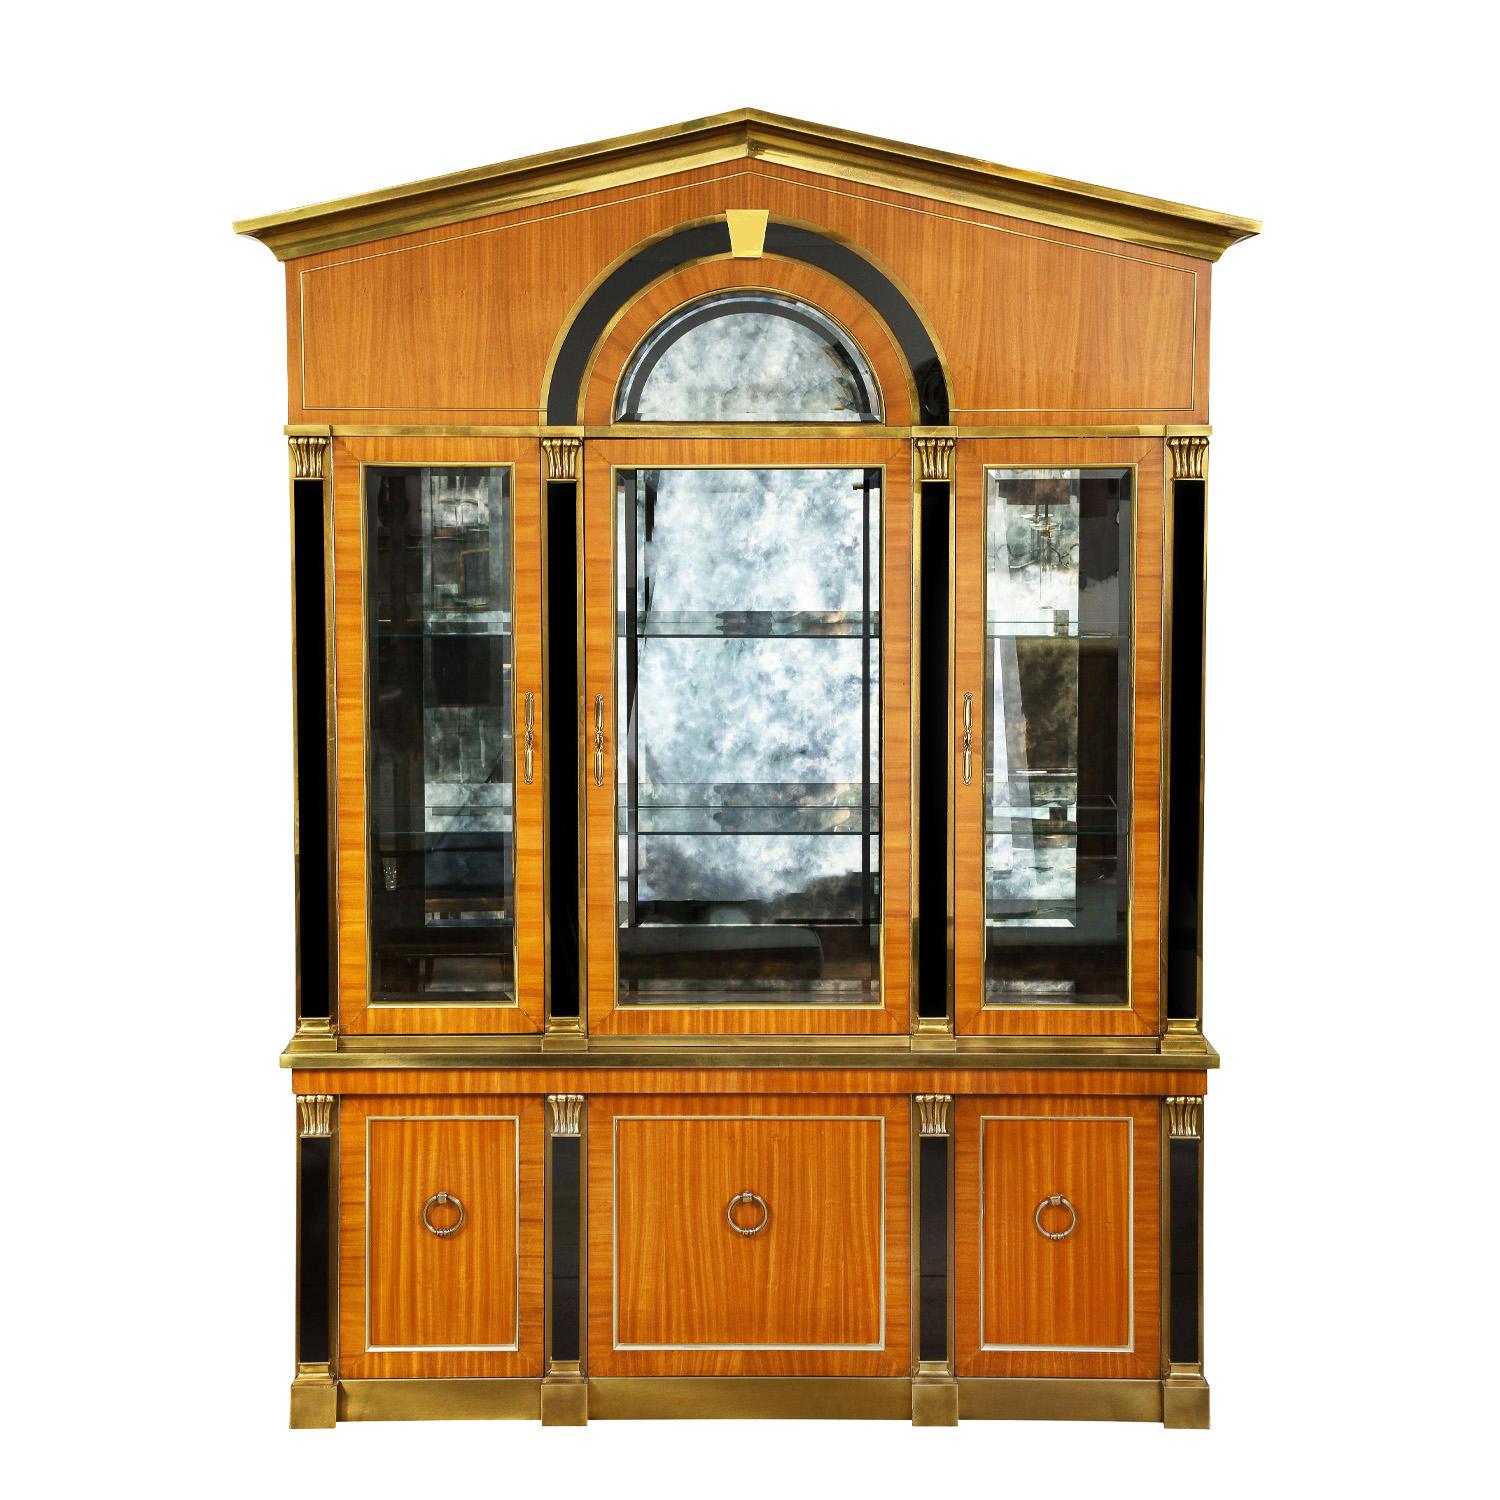 Stunning large illuminated Neoclassical display cabinet in bronze and mahogany with black granite on front and antique glass on back wall of top section of cabinet with glass shelves by Mastercraft, American 1960s.  The quality of the construction